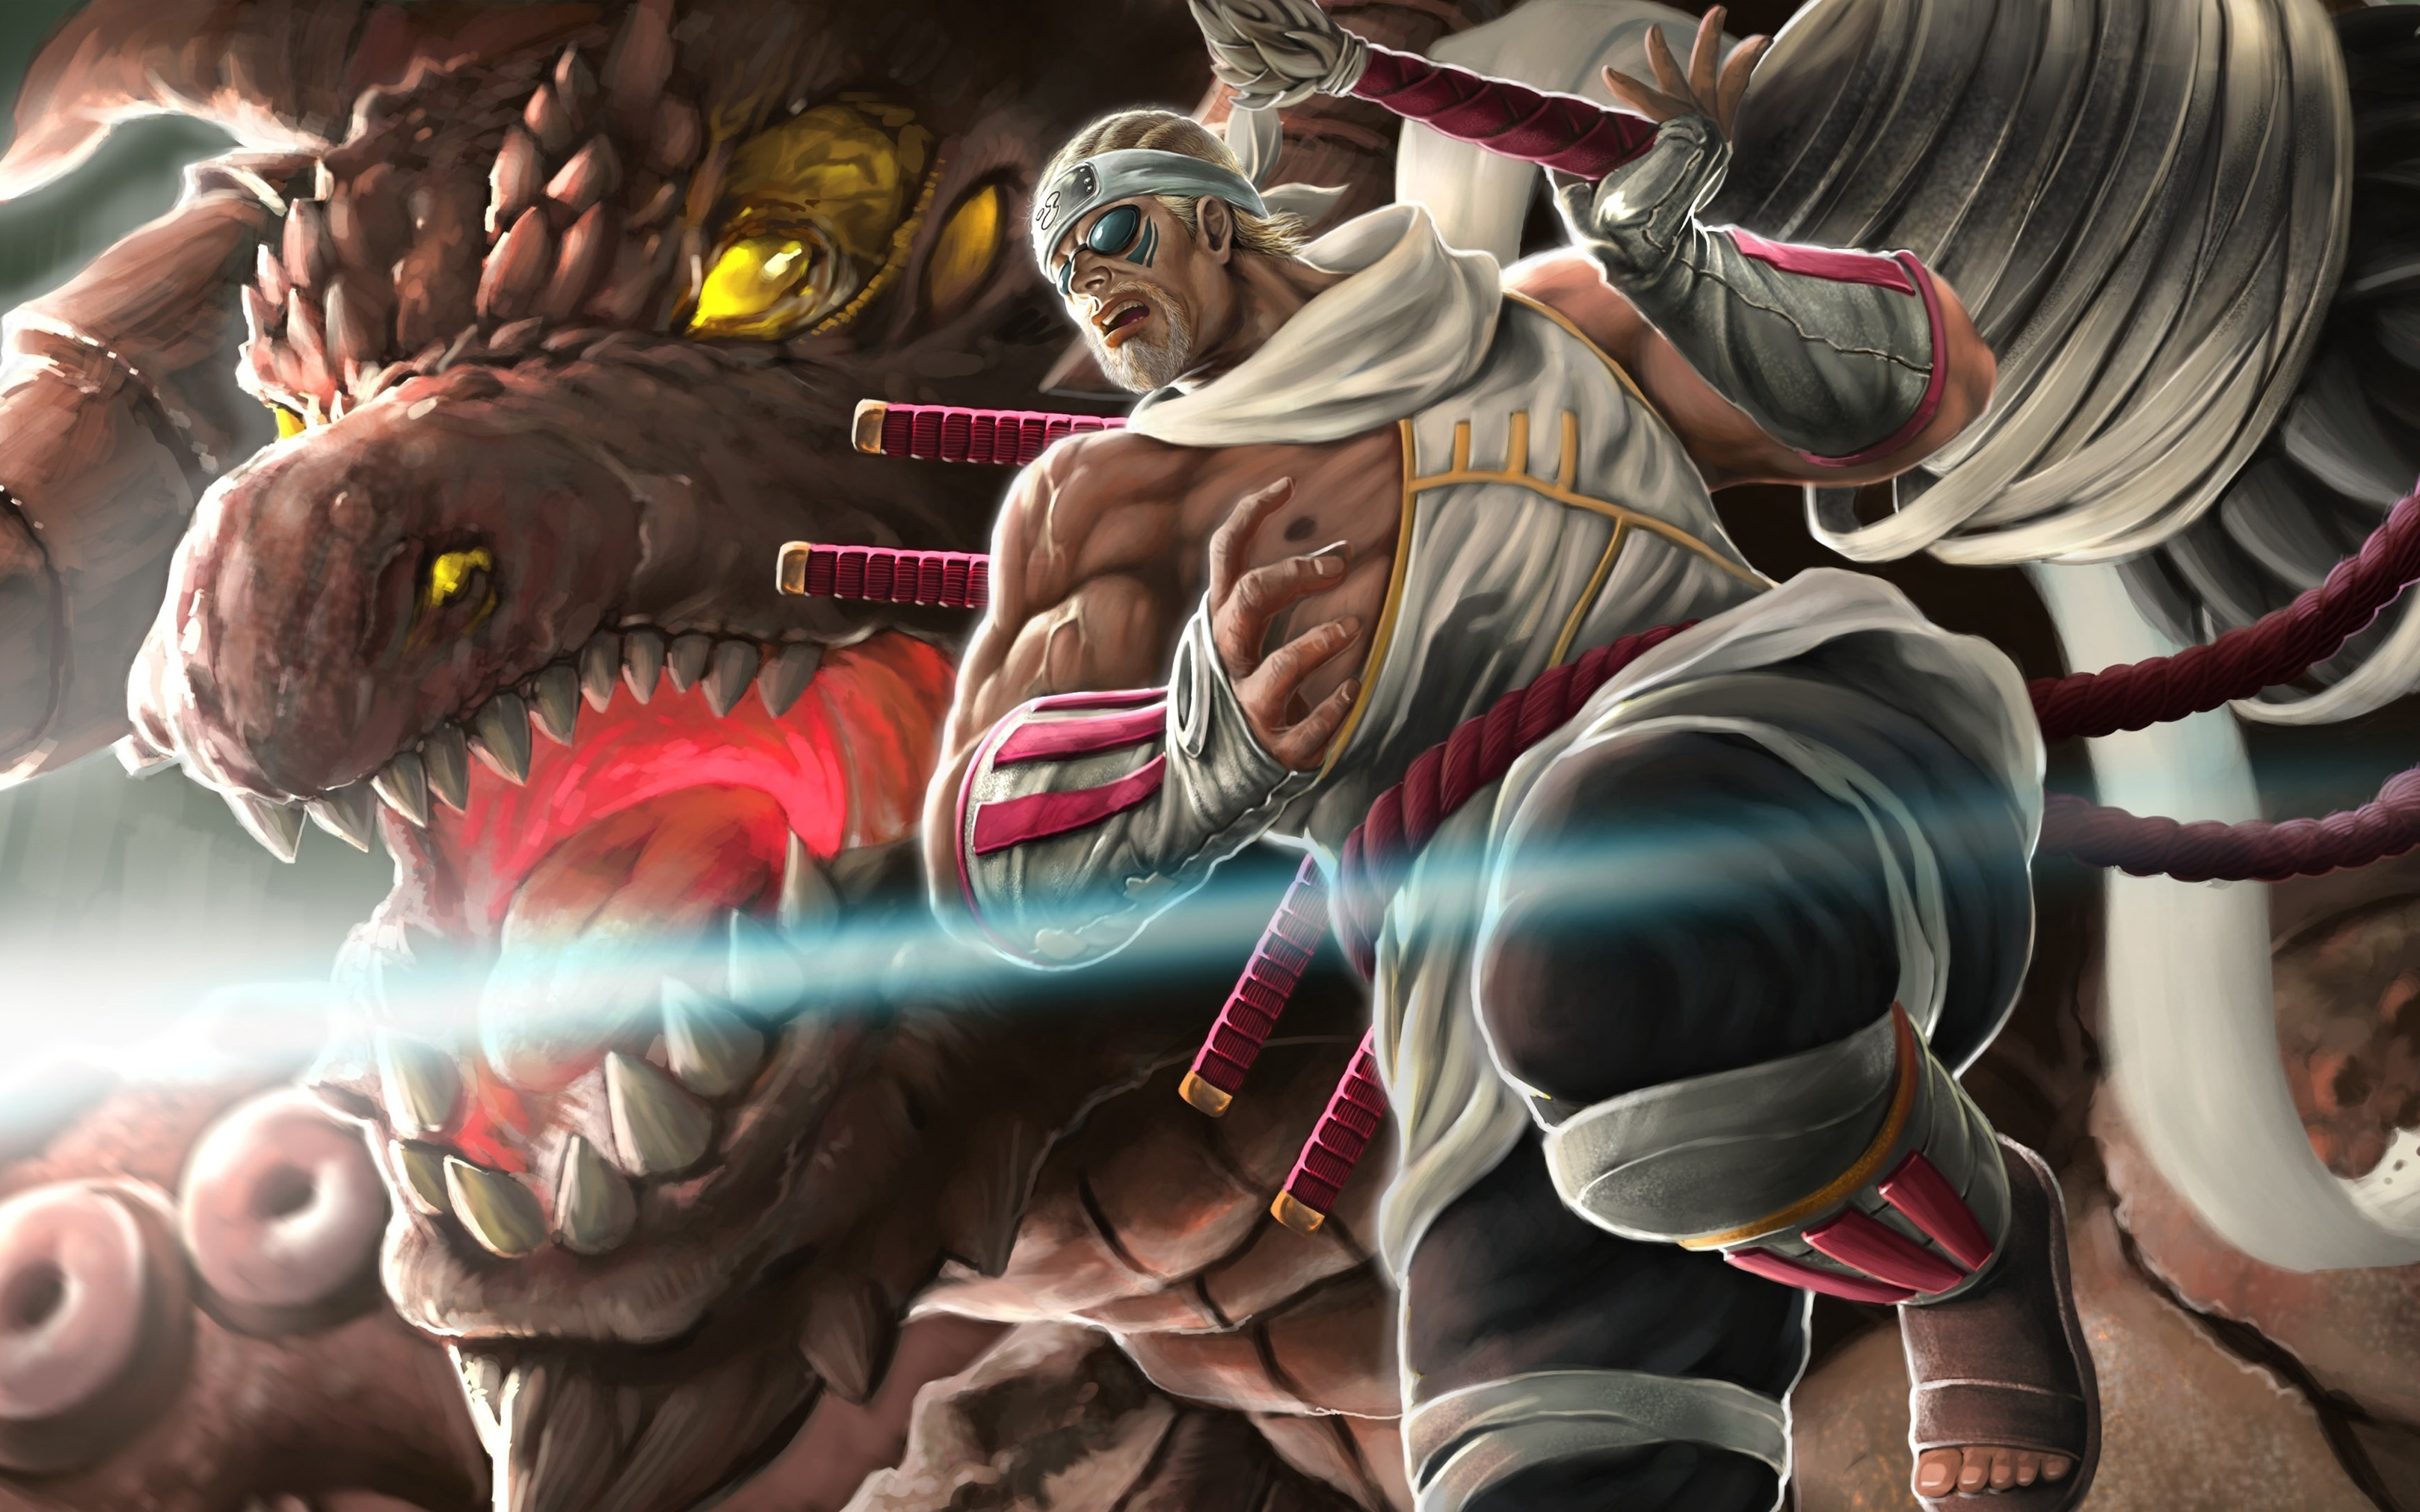 Download wallpapers Killer Bee, 4k, monster, Naruto, manga, artwork, Naruto  characters for desktop with resolution 3840x2400. High Quality HD pictures  wallpapers